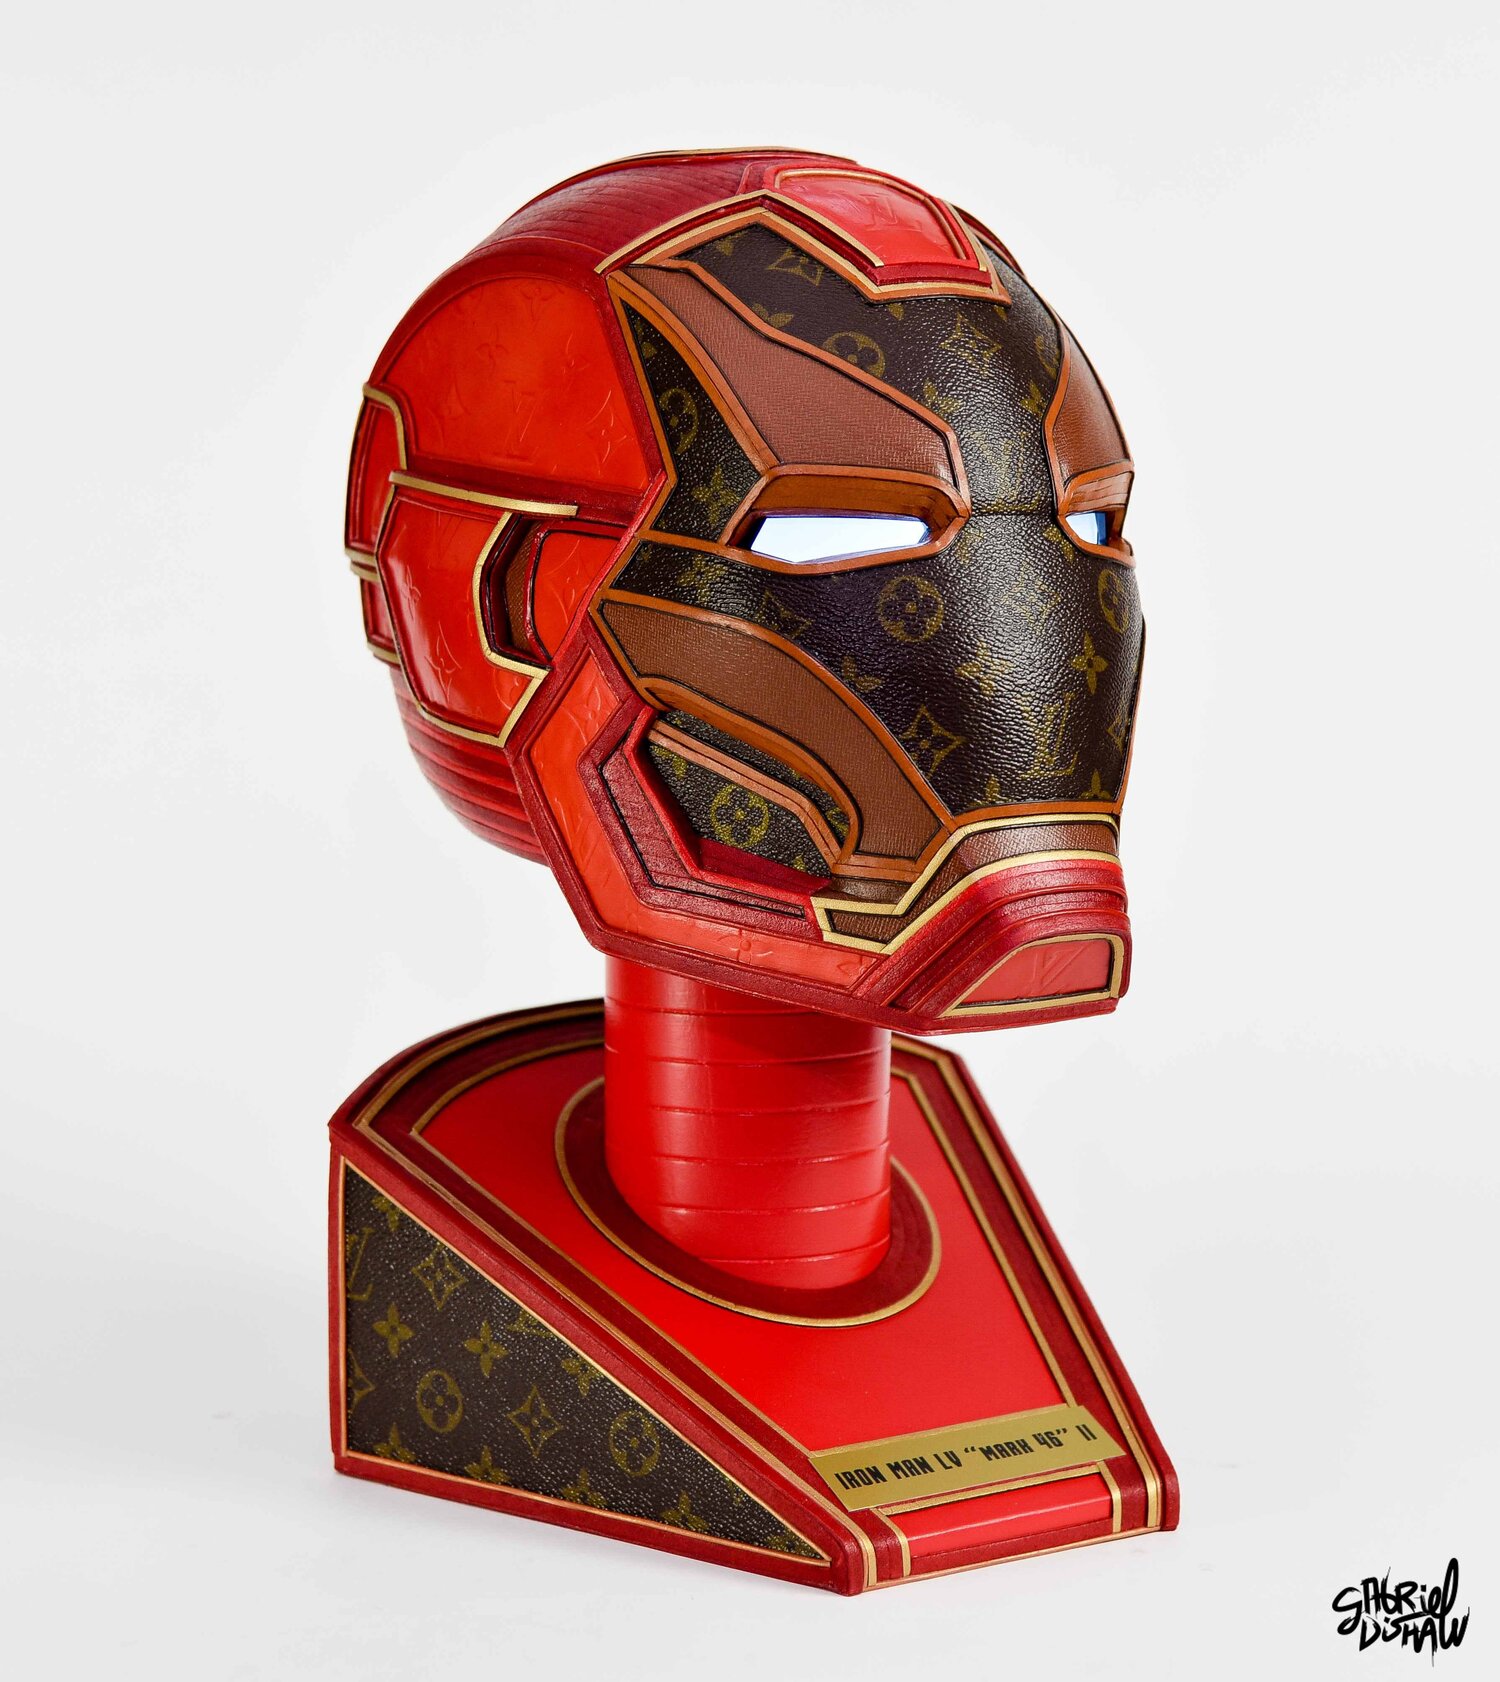 Louis Vuitton Iron Man mask for halloween 😍 Rate 1 to 100